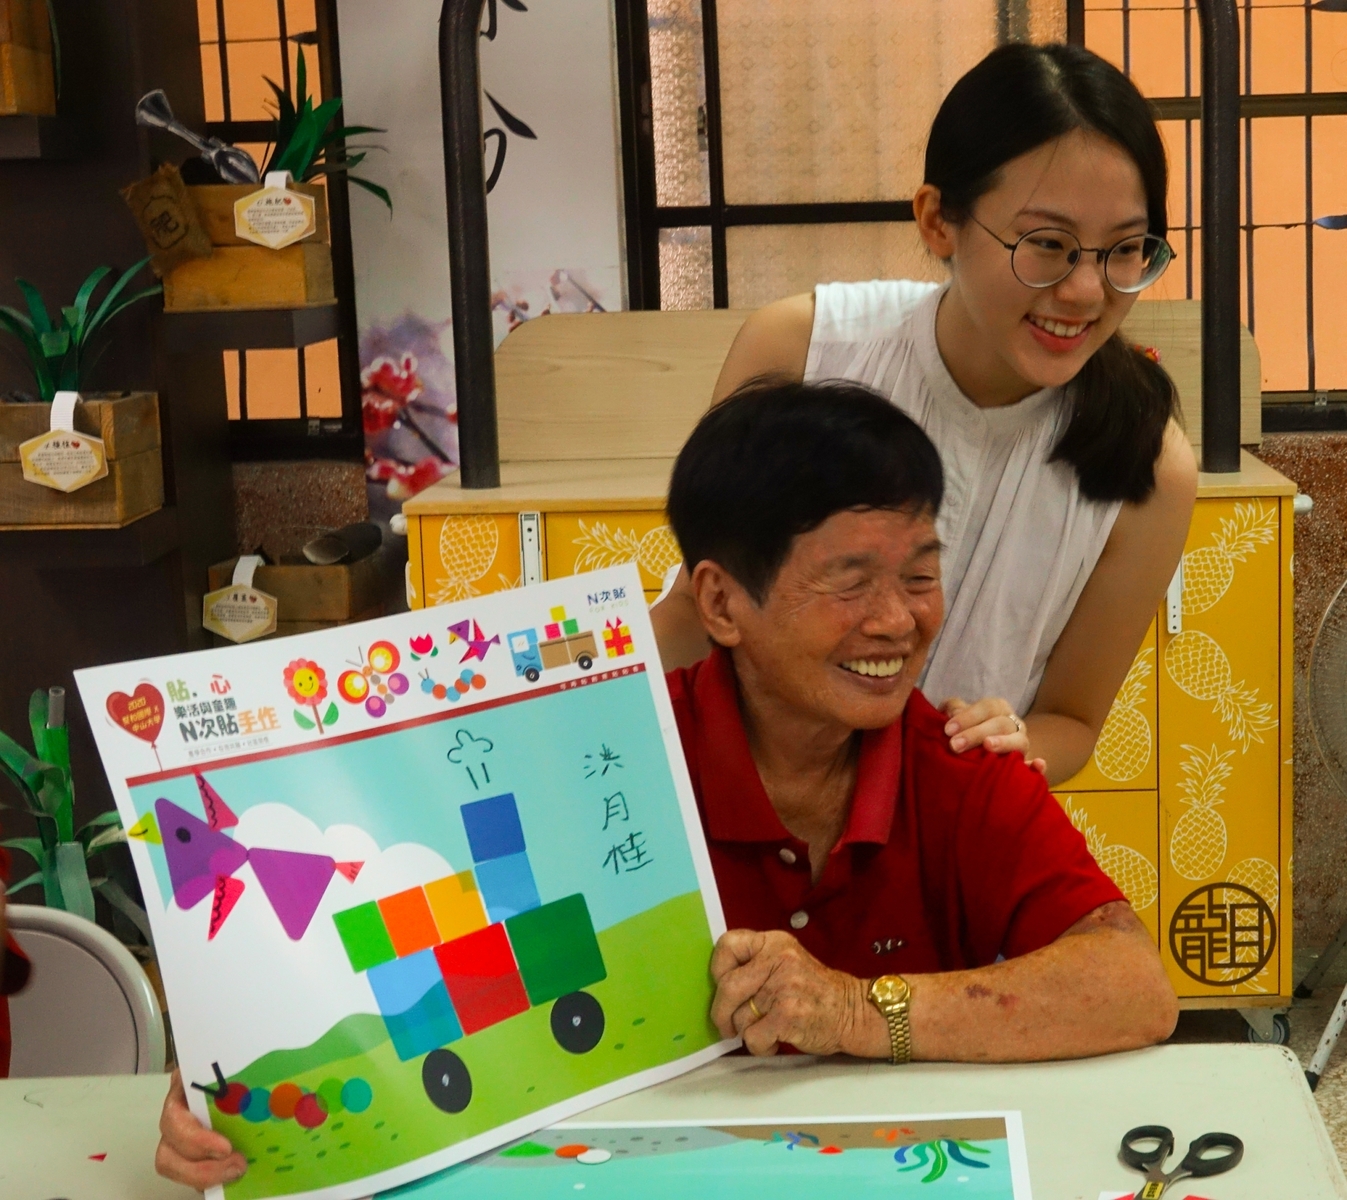 The USR Project of the College of Management and Hopax Fine Chemicals developed study materials for the elderly. (Photo from NSYSU files)